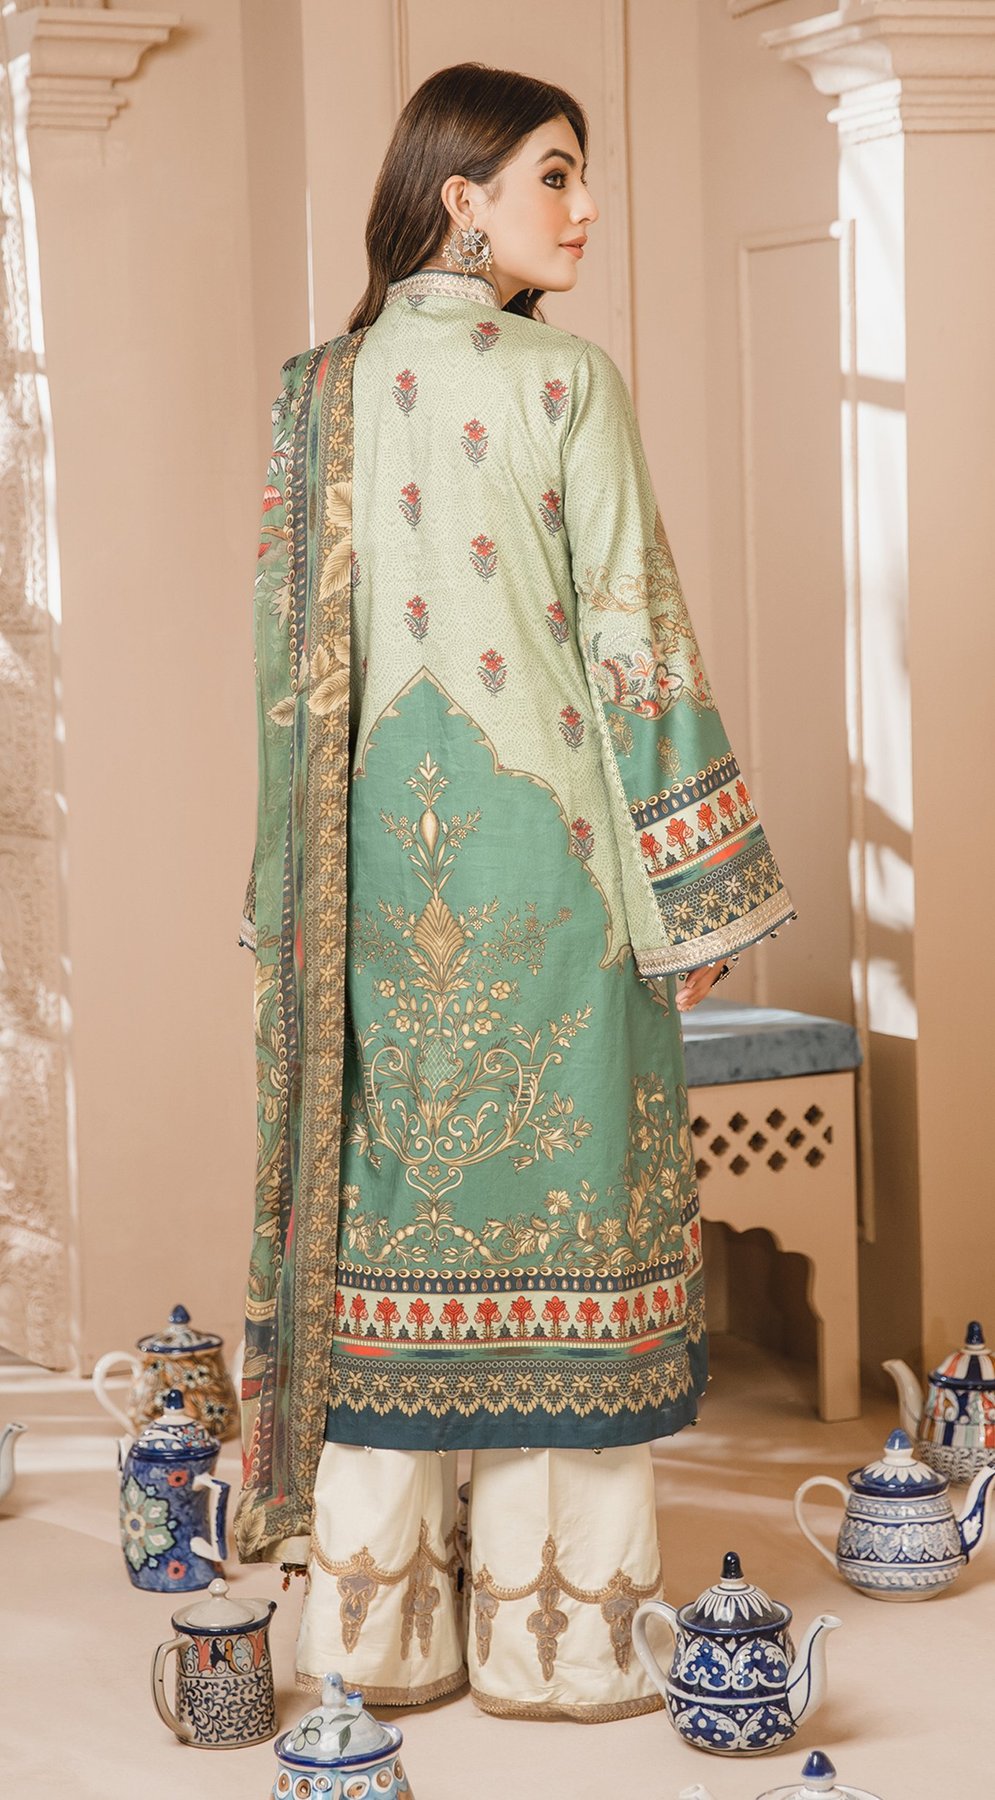 Shahnaz | Anaya by Kiran Chaudhry | Noor Bano | Unstitched Embroidered Cambric Collection'21